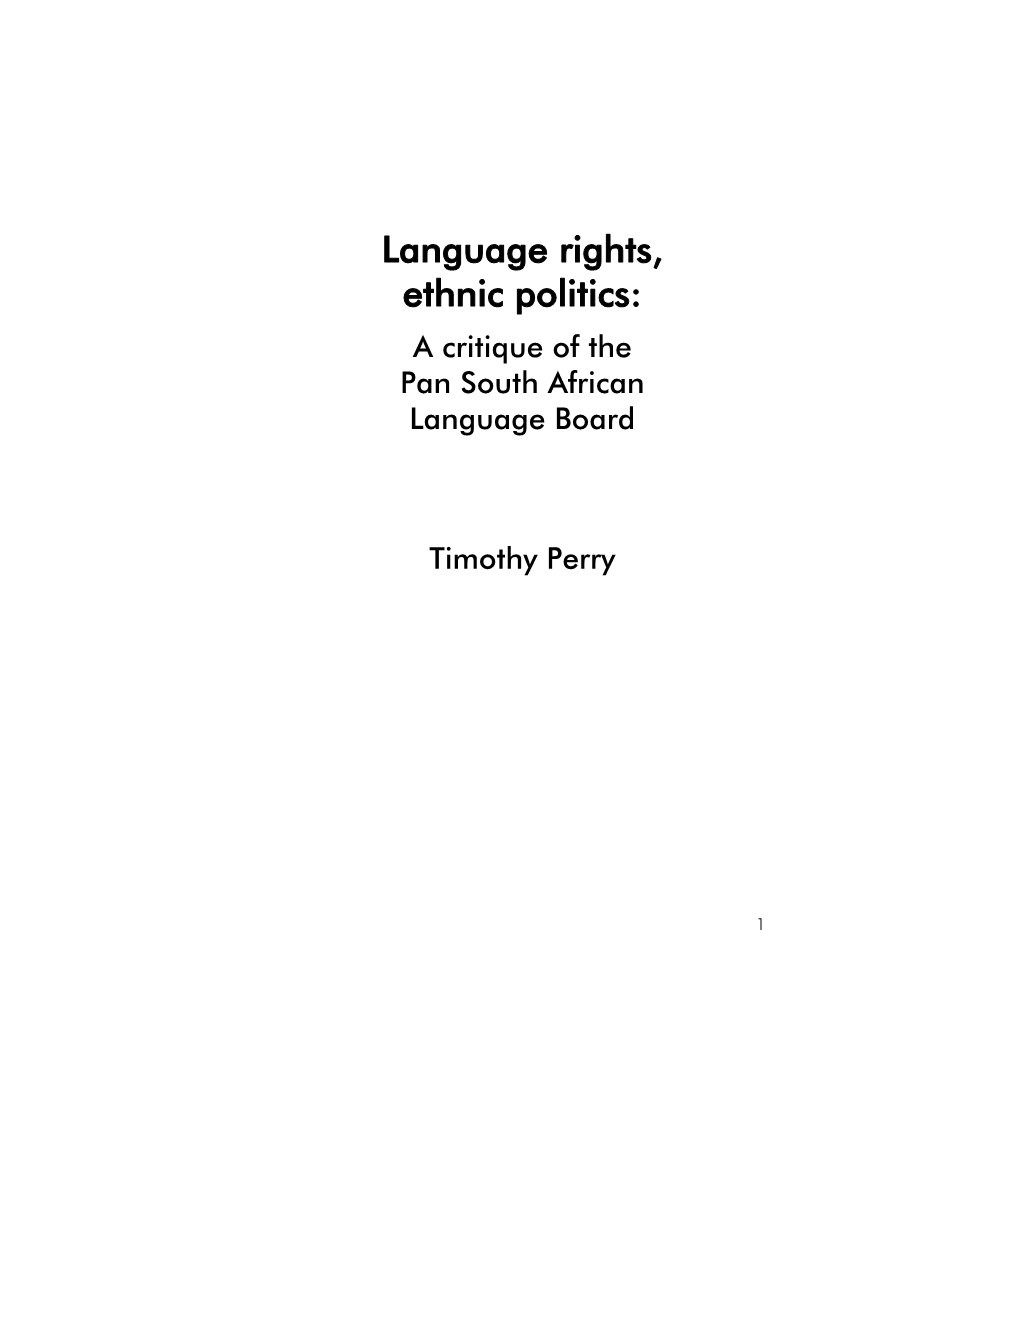 Language Rights, Ethnic Politics: a Critique of the Pan South African Language Board